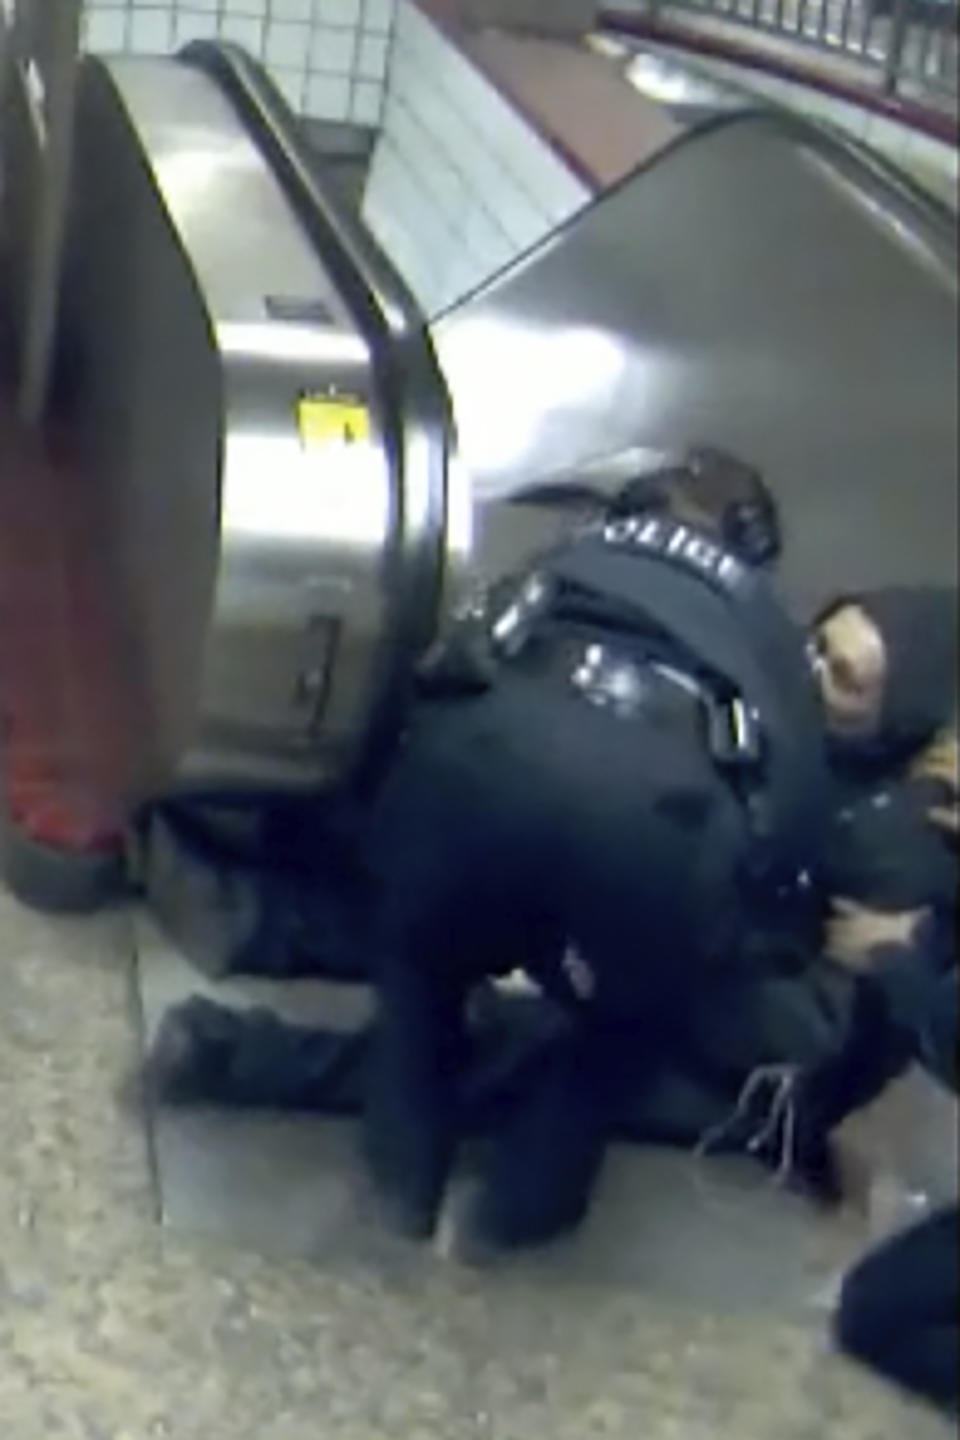 In this Feb. 28, 2020 image from video provided by the Civilian Office of Police Accountability, police officers tend to Ariel Roman after he was shot by police in a subway station in Chicago. Extended security and body-cam video released Tuesday, April 28, 2020 shows Chicago police shooting the unarmed short-order cook at the foot of a subway escalator and then again with his back turned to officers after they tried to stop him for violating a city ordinance by walking from one train car to another. (Chicago Transit Authority, Civilian Office of Police Accountability via AP)